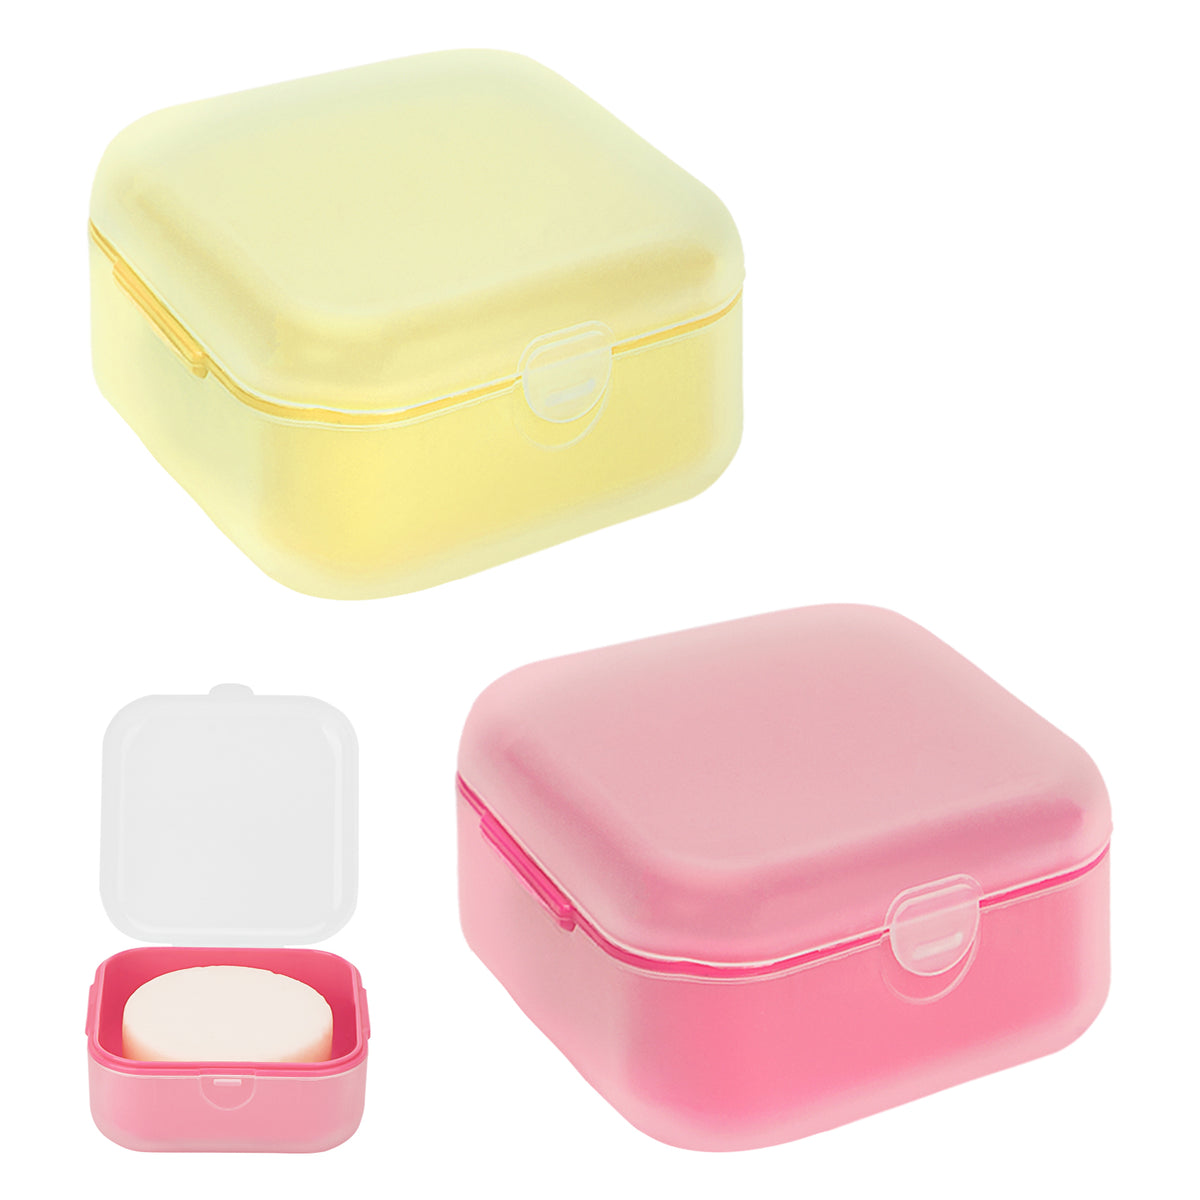 Adorila 2 Pack Small Travel Soap Case with Lid, Leak-Proof Soap Container with Perforation, Portable Soap Box for Bathroom (Yellow, Pink)